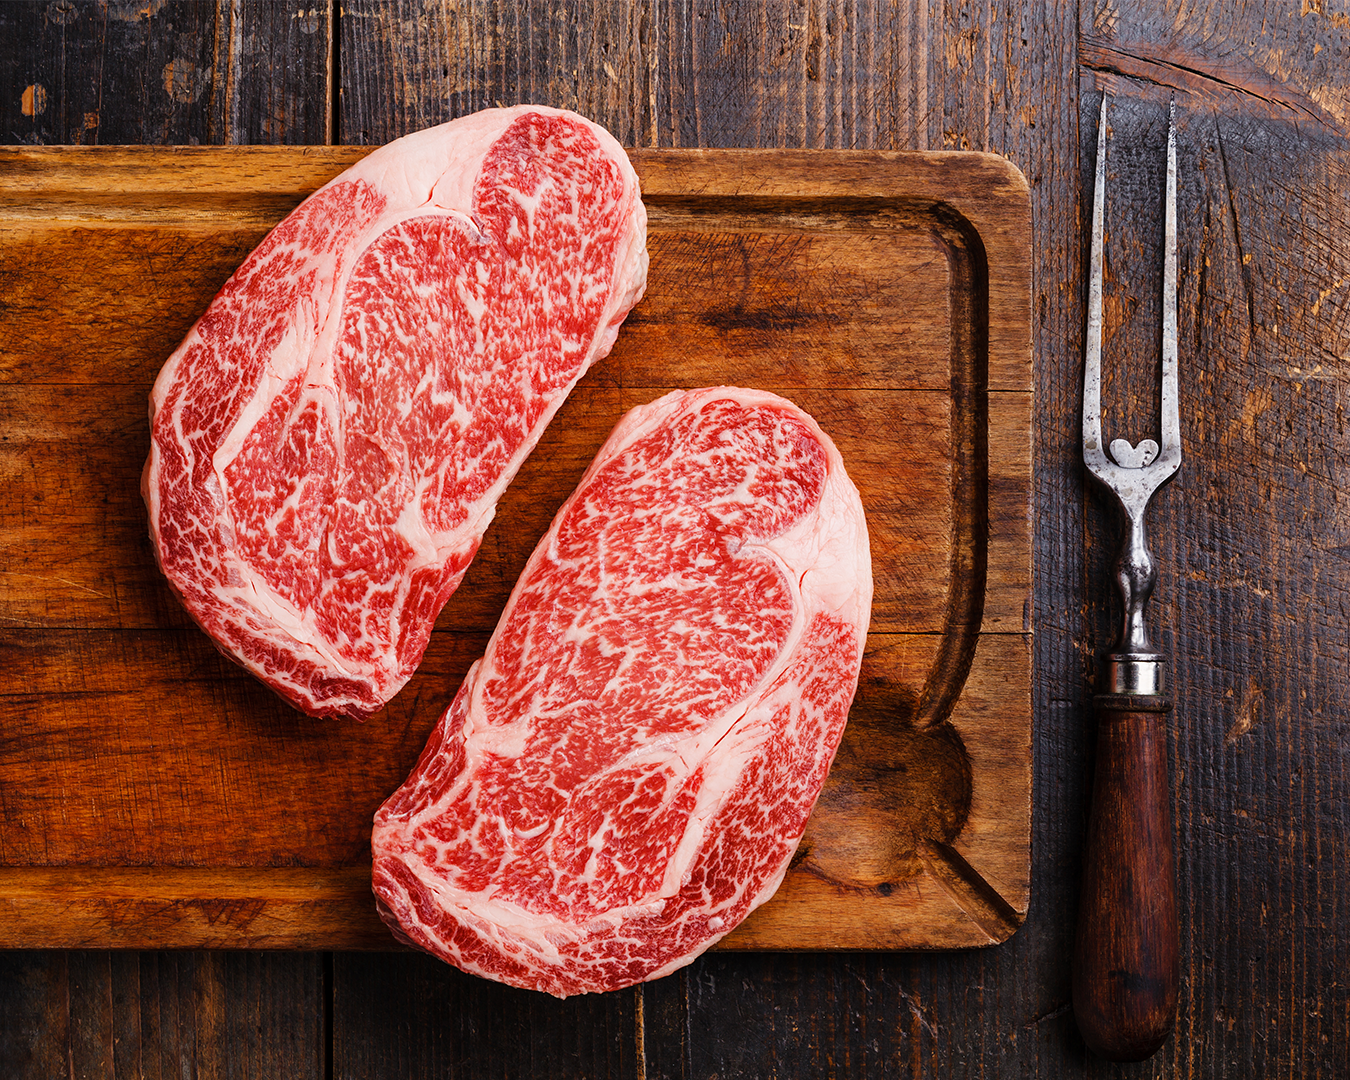 A5 Japanese Wagyu Beef NY Strip Steak — Fairway Packing